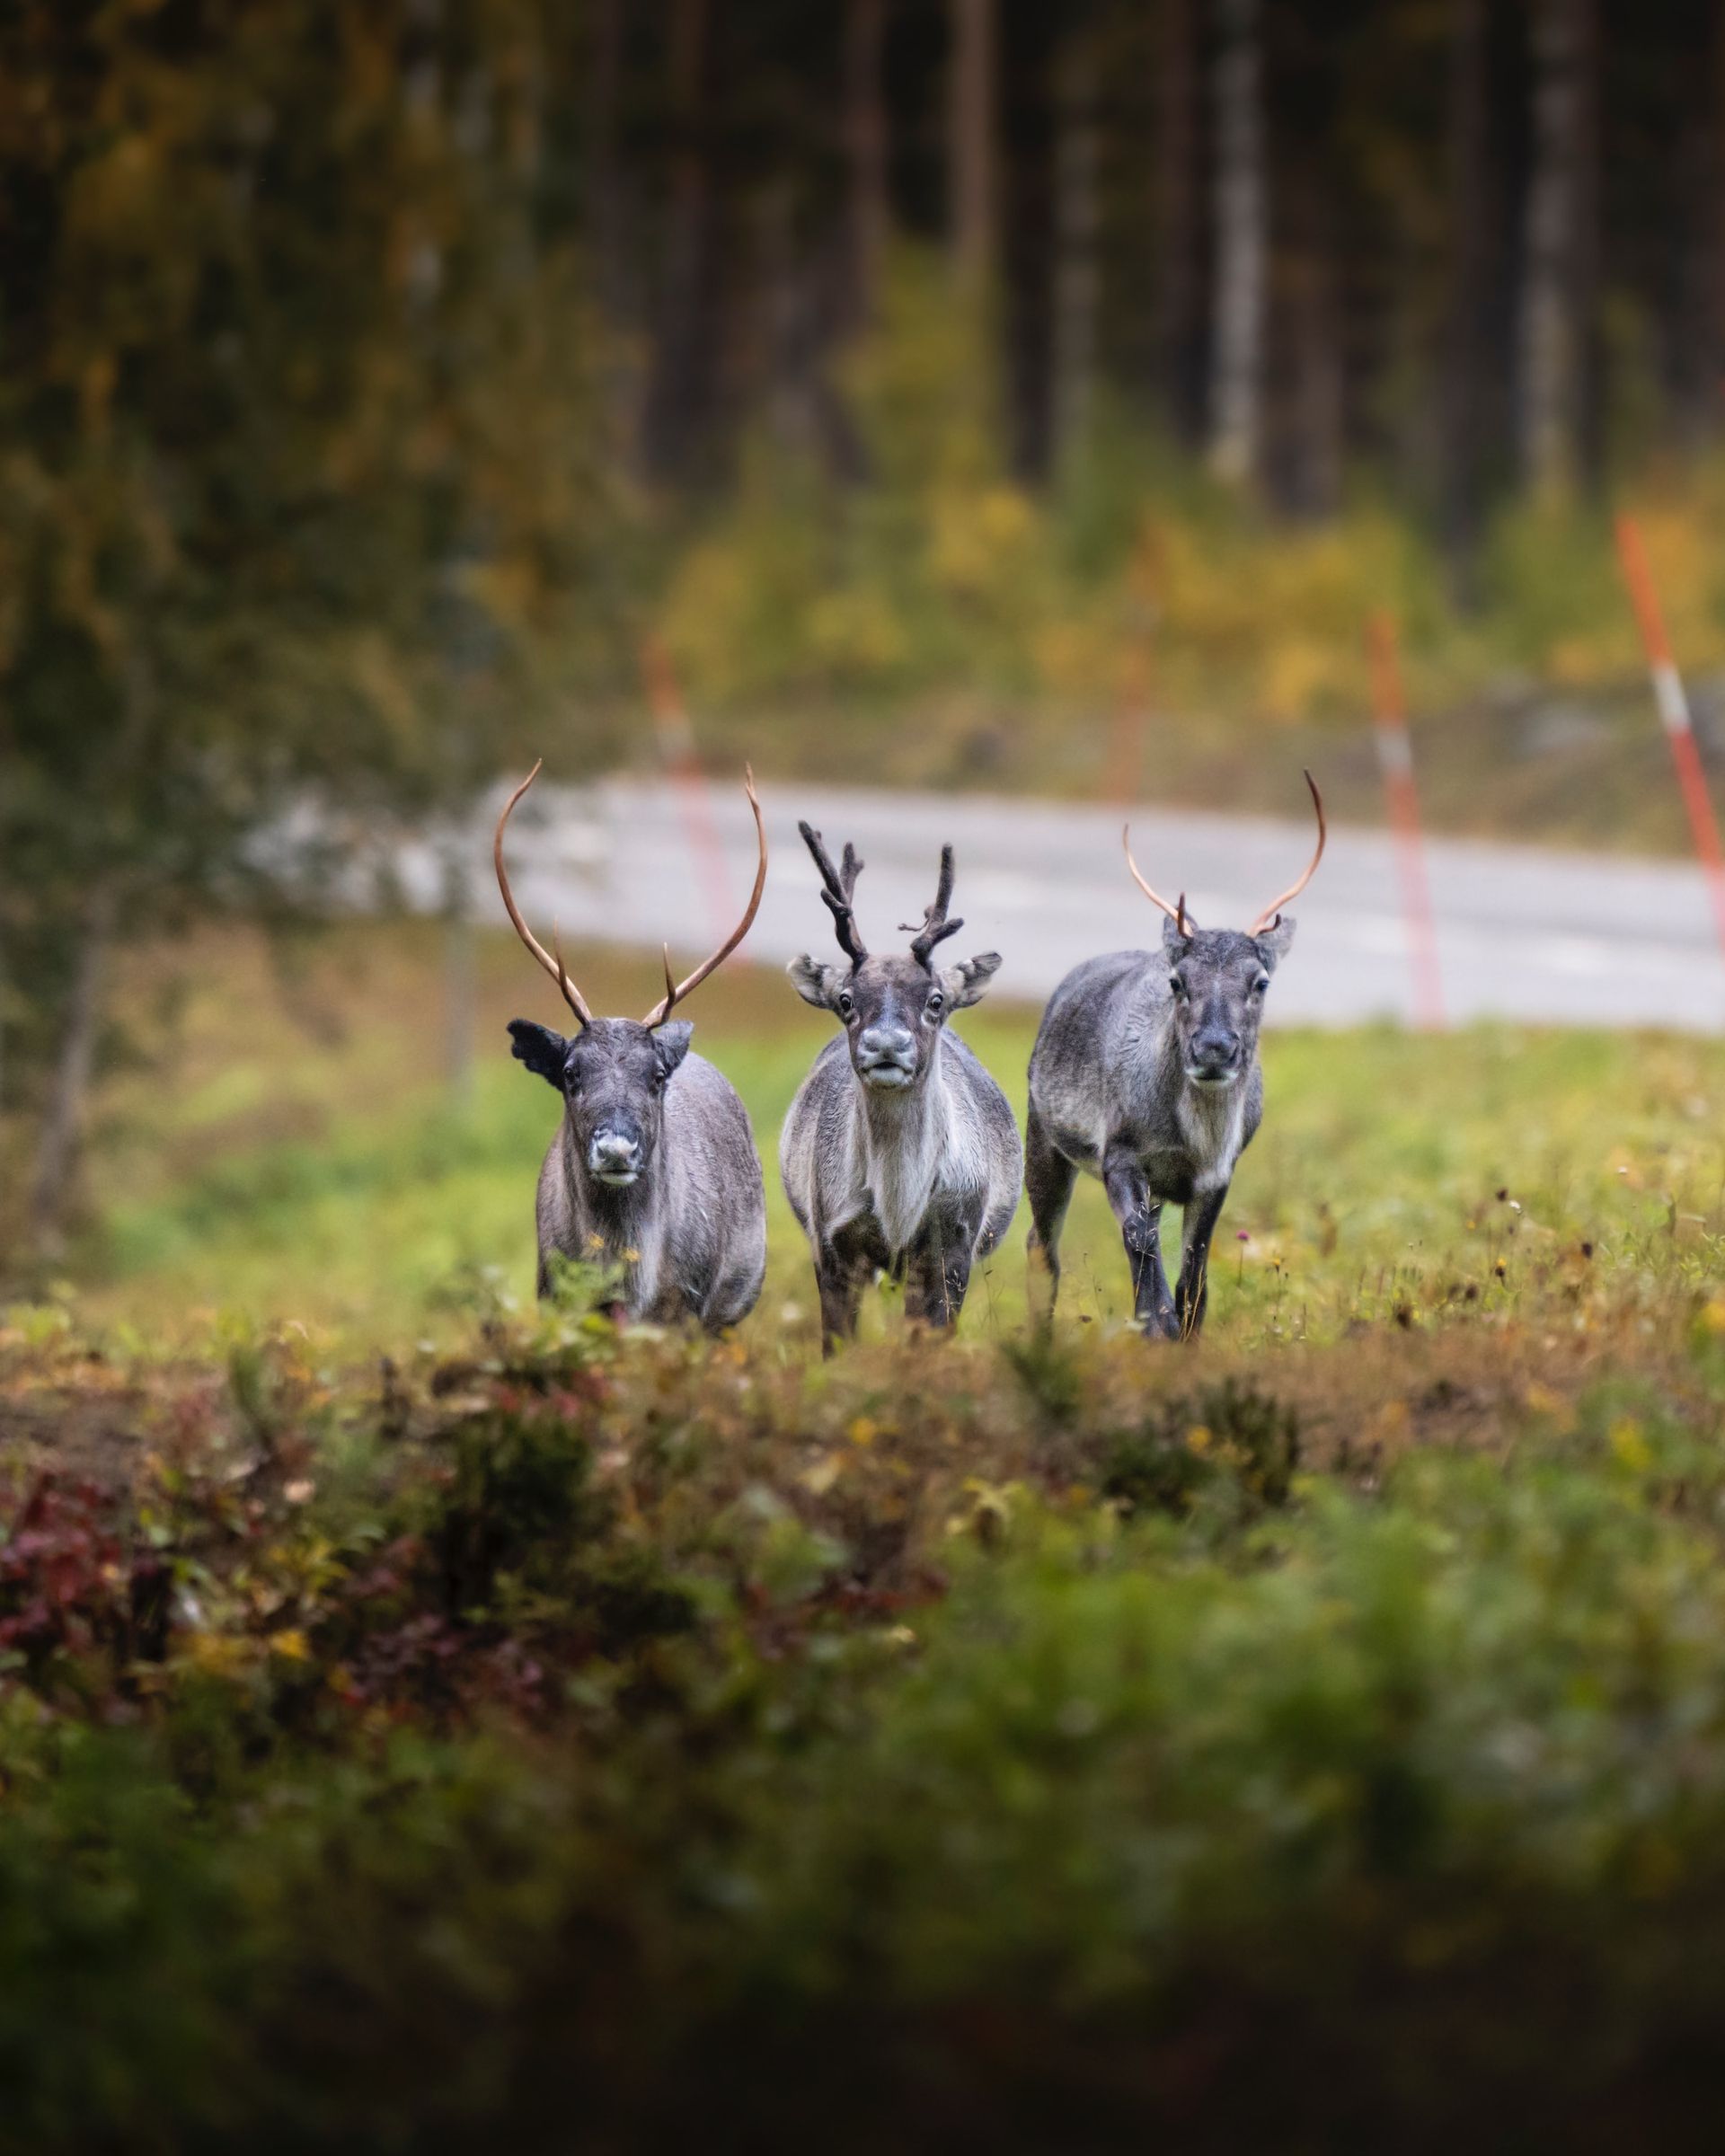 Three reindeer are running in a field next to a road.